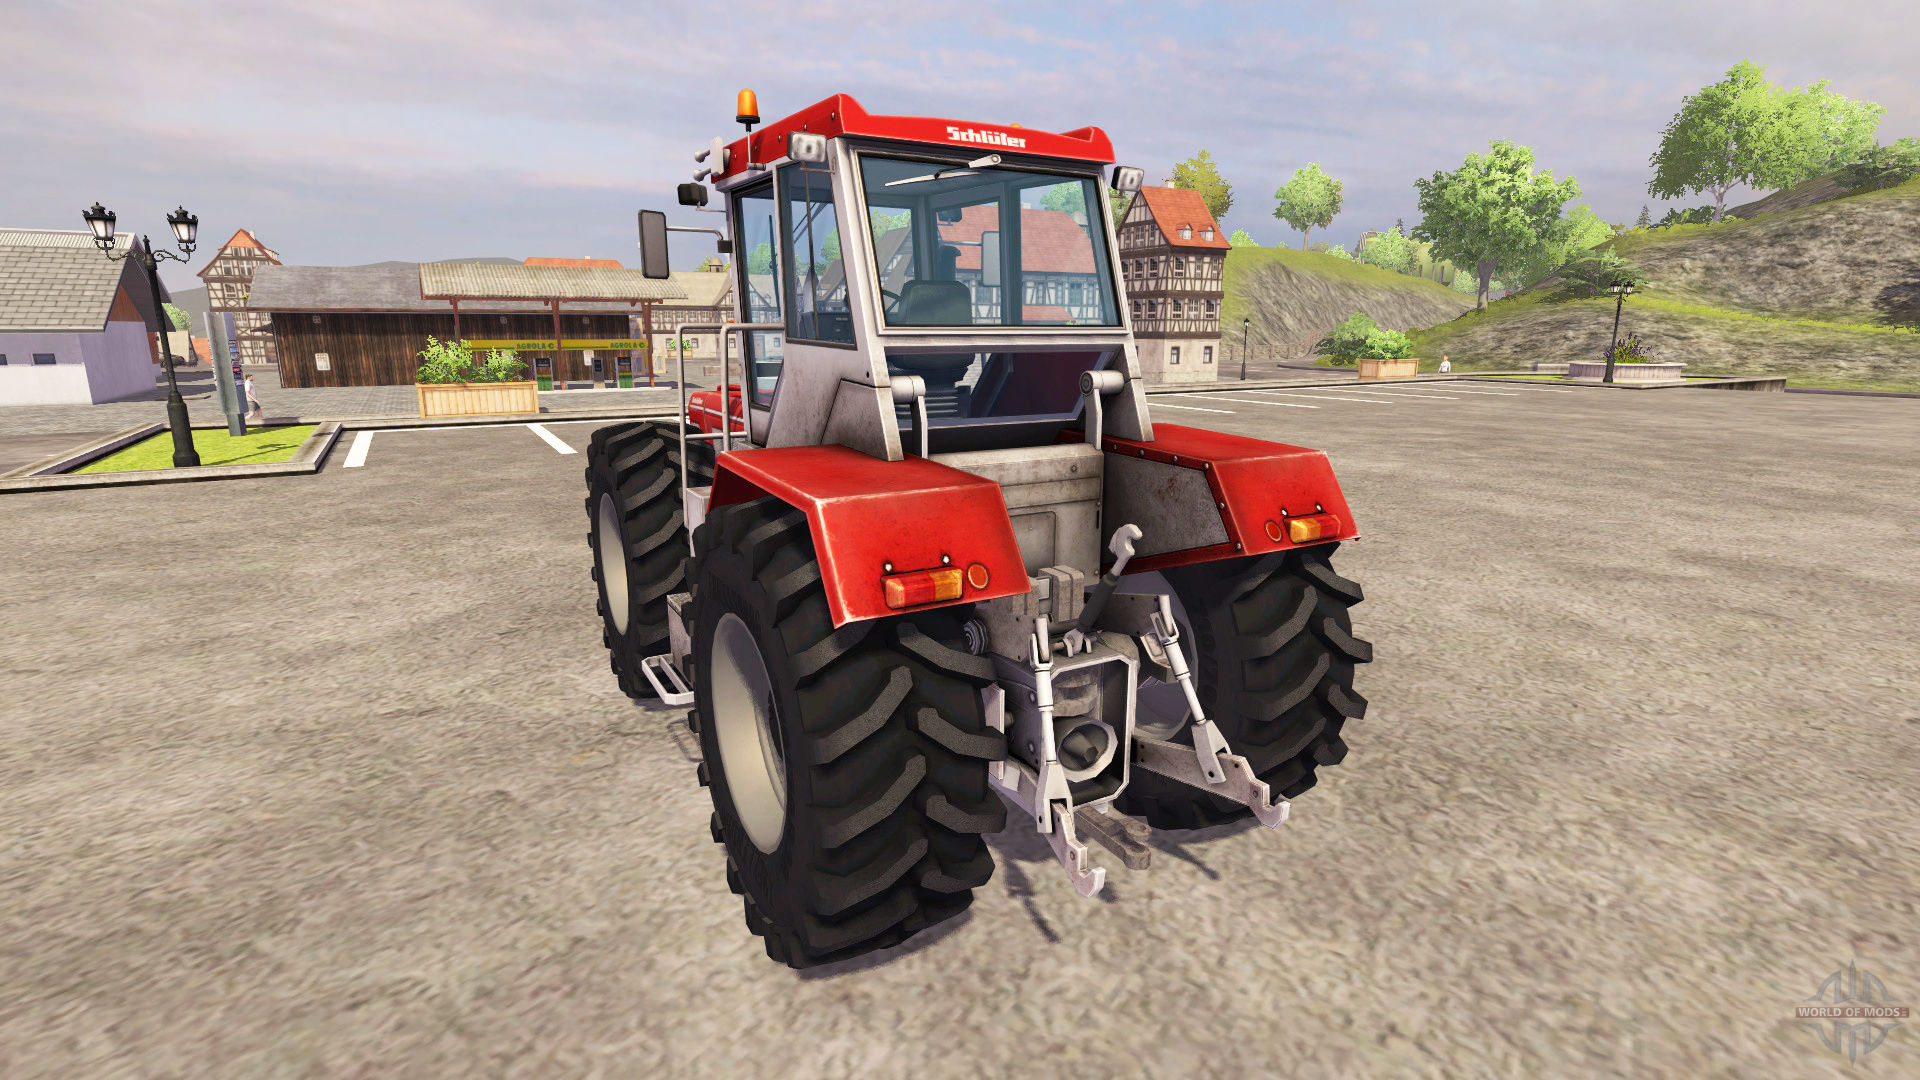 Agricultural tractor Schluter Super Trac 2500 VL [ploughspec] for ...